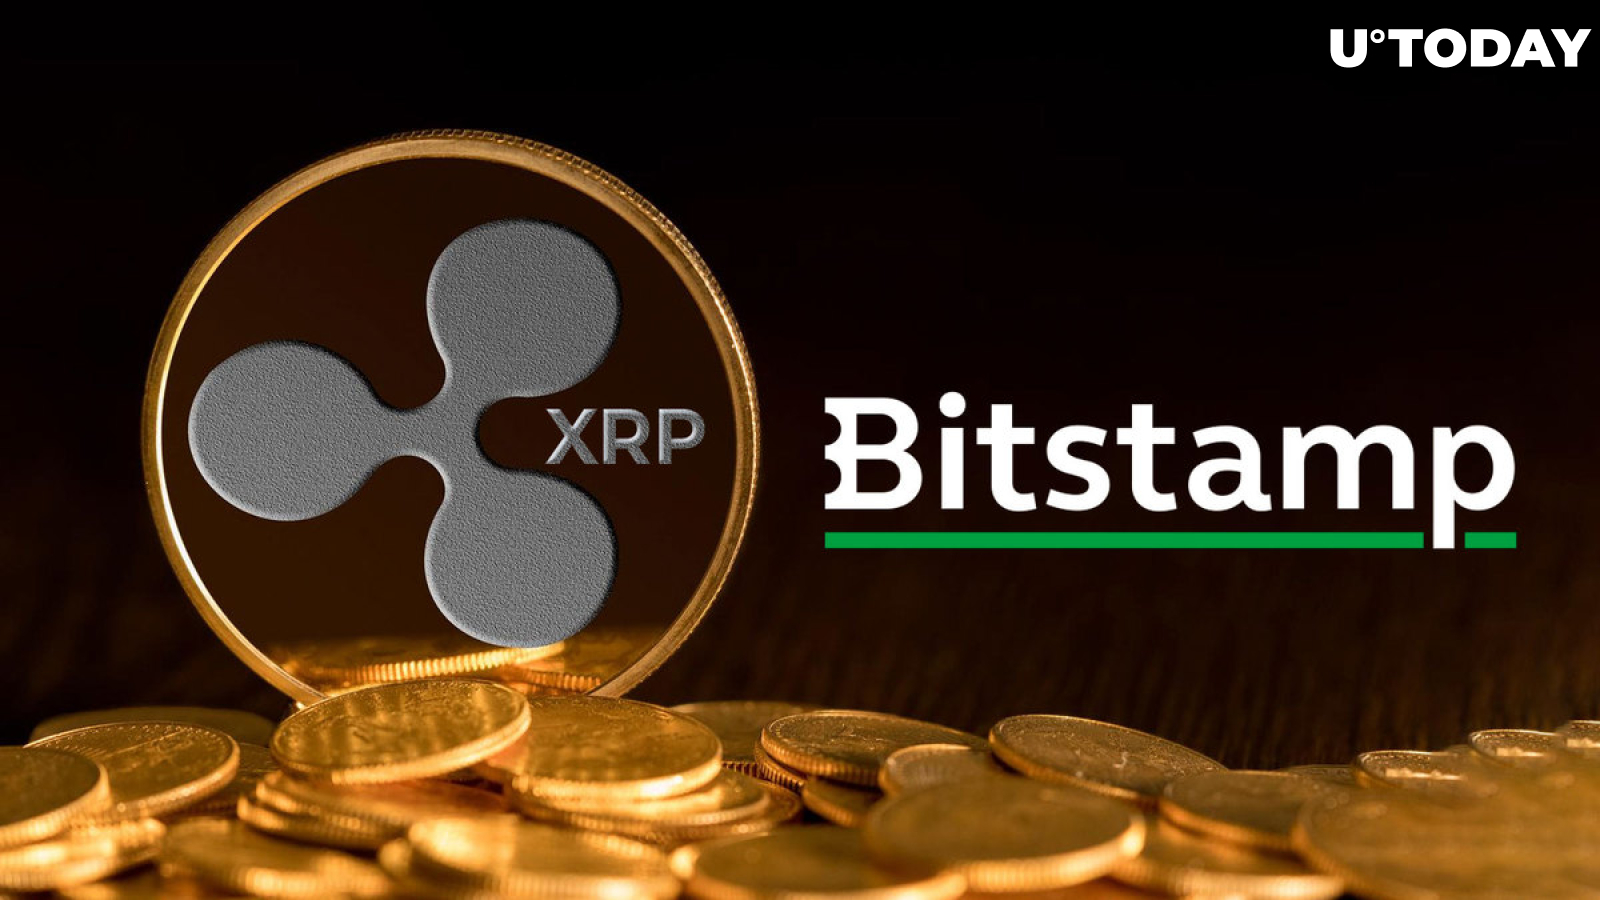 XRP Army Reacts to Another Mysterious Ripple Transfer of XRP to Bitstamp